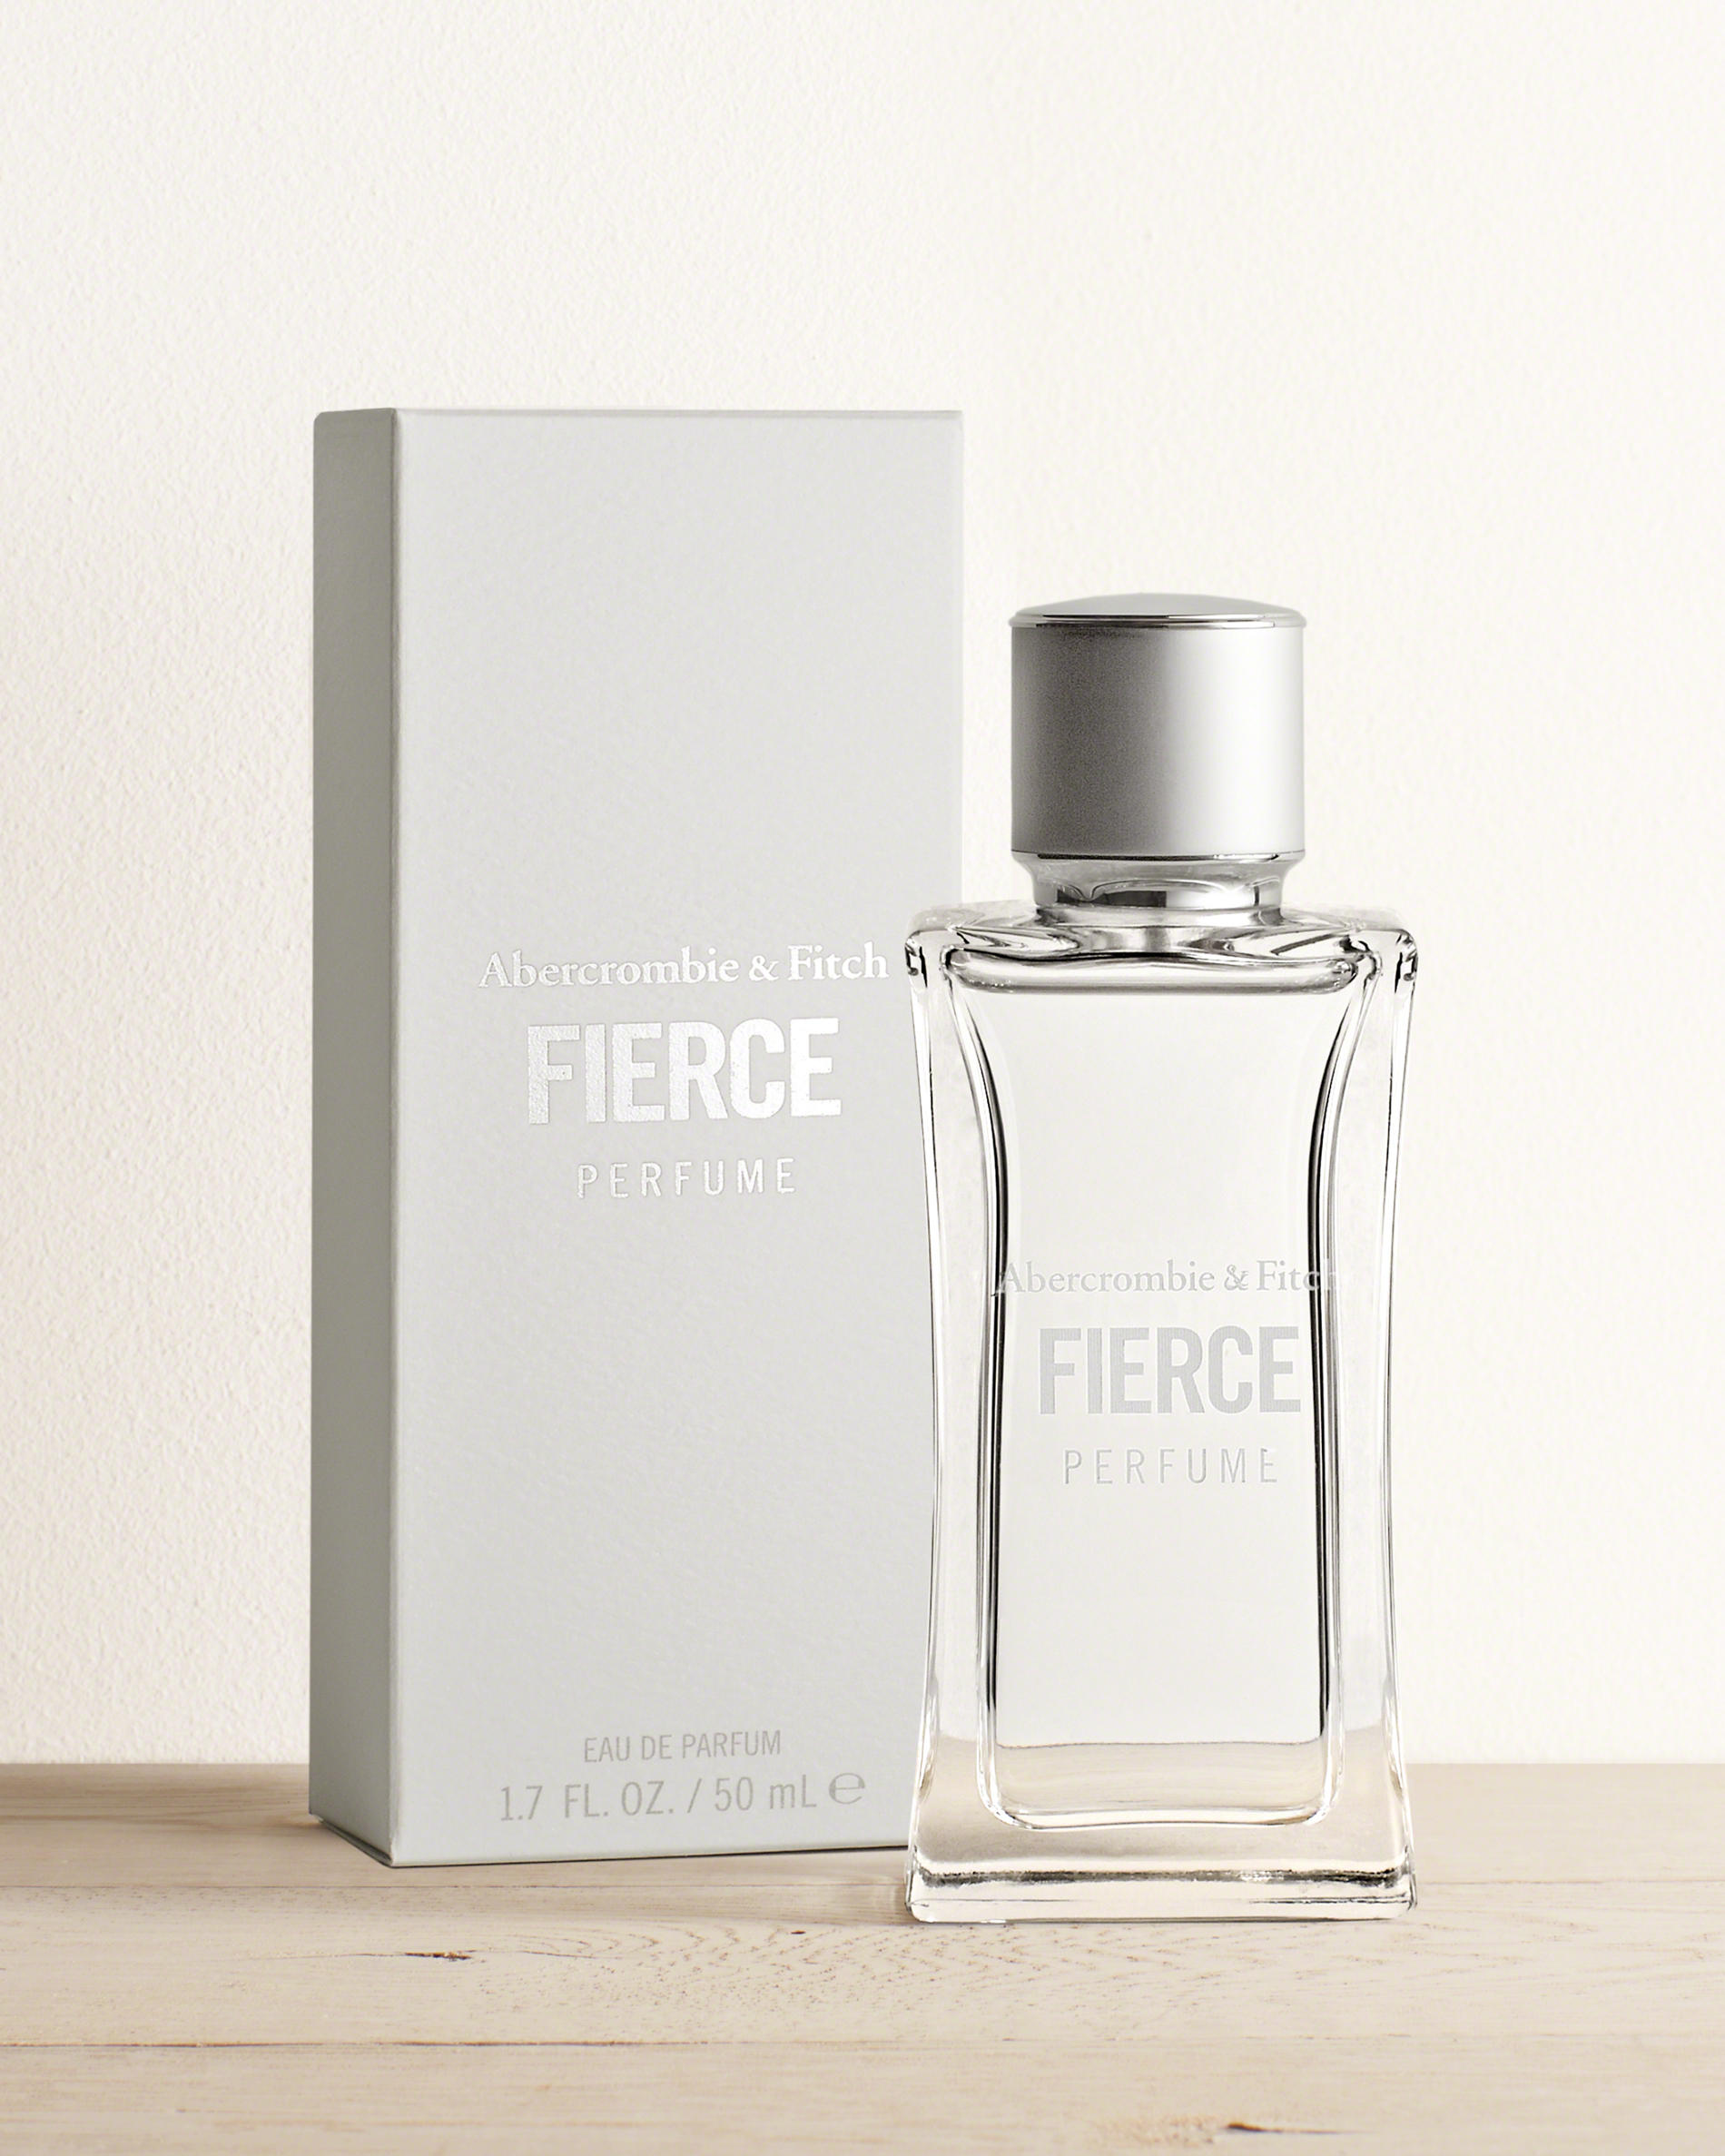 abercrombie and fitch fierce cologne